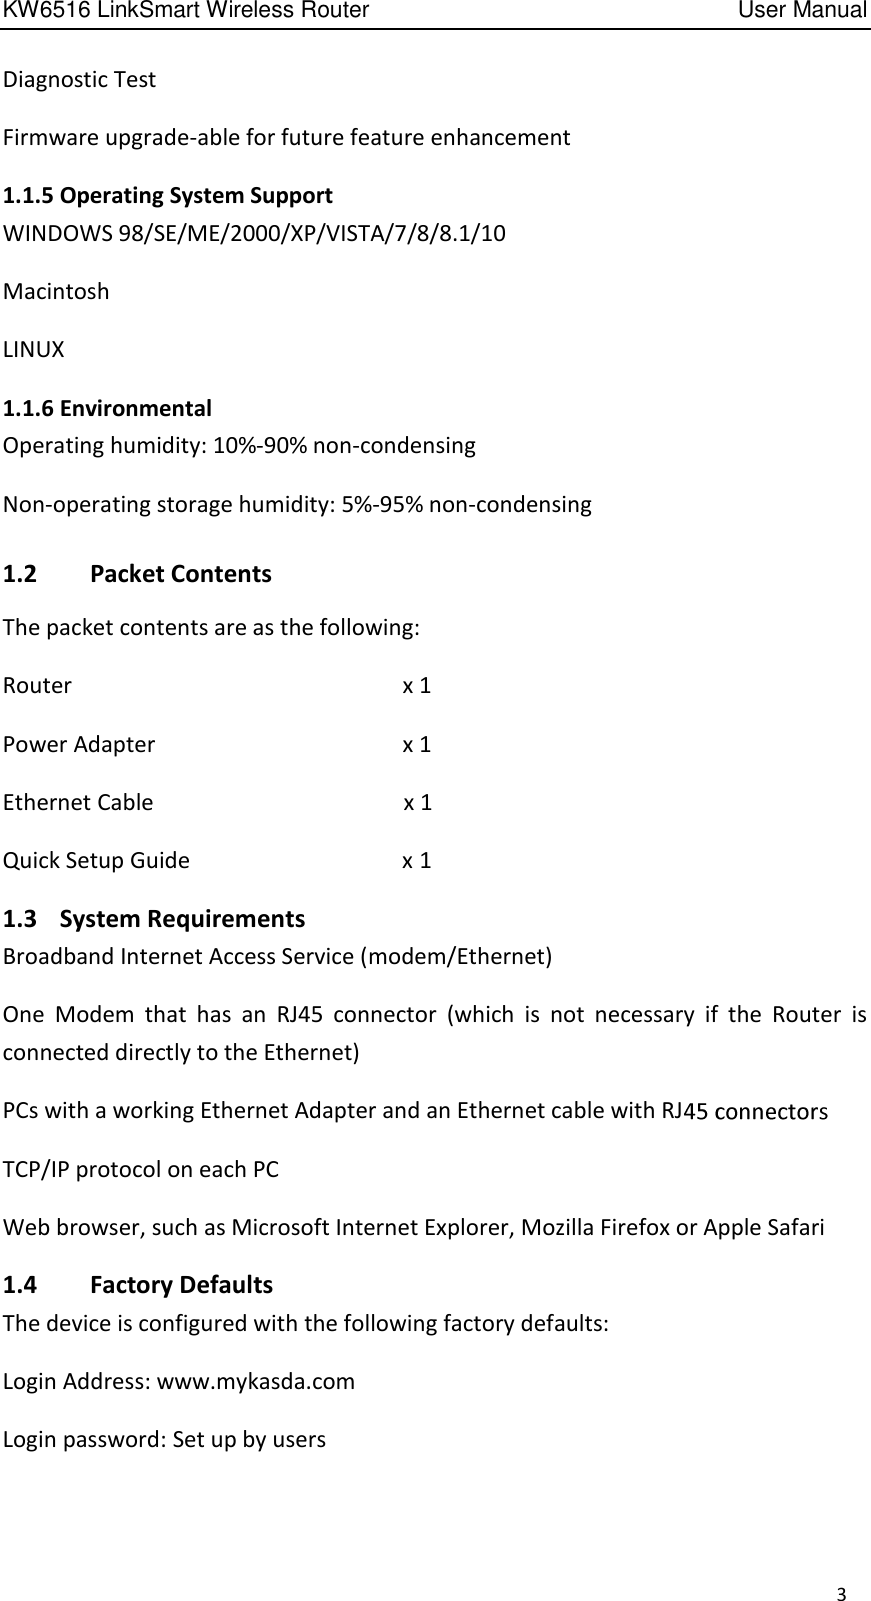 KW6516 LinkSmart Wireless Router         User Manual 3 Diagnostic Test Firmware upgrade-able for future feature enhancement 1.1.5 Operating System Support WINDOWS 98/SE/ME/2000/XP/VISTA/7/8/8.1/10 Macintosh LINUX 1.1.6 Environmental Operating humidity: 10%-90% non-condensing Non-operating storage humidity: 5%-95% non-condensing 1.2  Packet Contents The packet contents are as the following: Router                      x 1 Power Adapter            .x 1 Ethernet Cable                                    x 1 Quick Setup Guide                                  x 1 1.3    System Requirements Broadband Internet Access Service (modem/Ethernet) One  Modem  that  has  an  RJ45  connector  (which  is  not  necessary  if  the  Router  is connected directly to the Ethernet)   PCs with a working Ethernet Adapter and an Ethernet cable with RJ  TCP/IP protocol on each PC   Web browser, such as Microsoft Internet Explorer, Mozilla Firefox or Apple Safari   1.4   Factory Defaults The device is configured with the following factory defaults: Login Address: www.mykasda.com Login password: Set up by users 